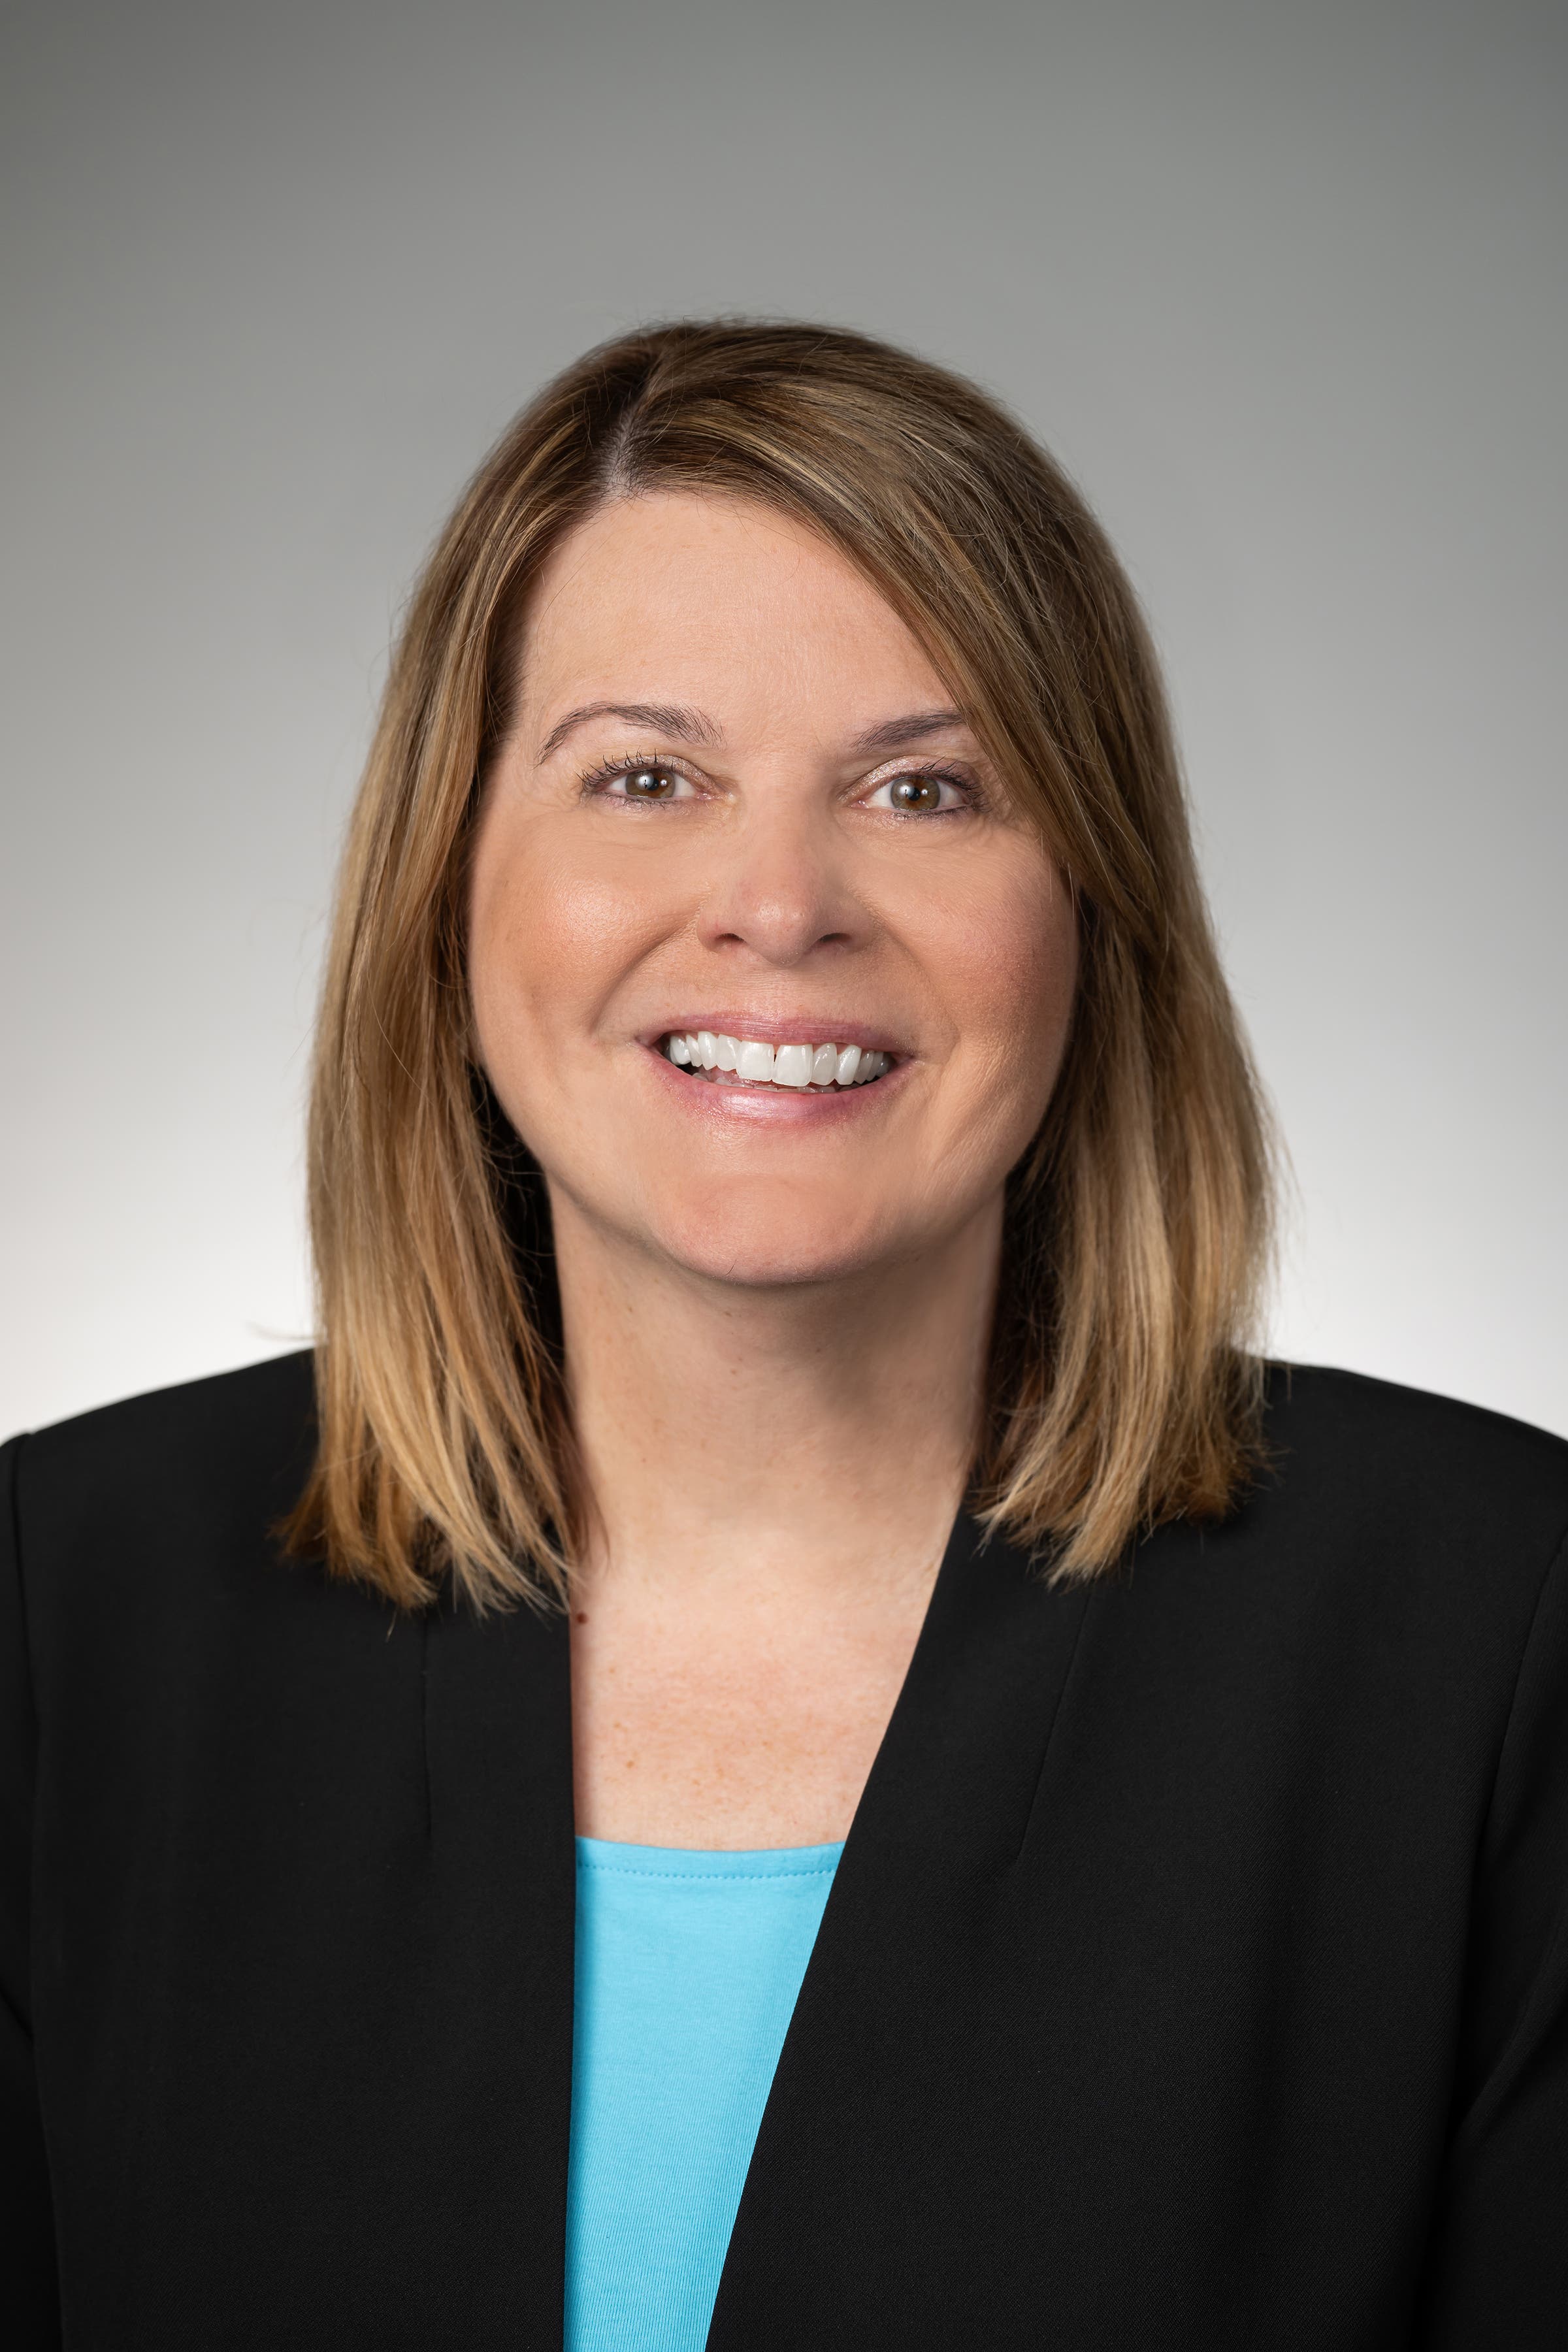 Harford Bank Welcomes Allyson Riggs as VP, Manager of Mortgage Lending